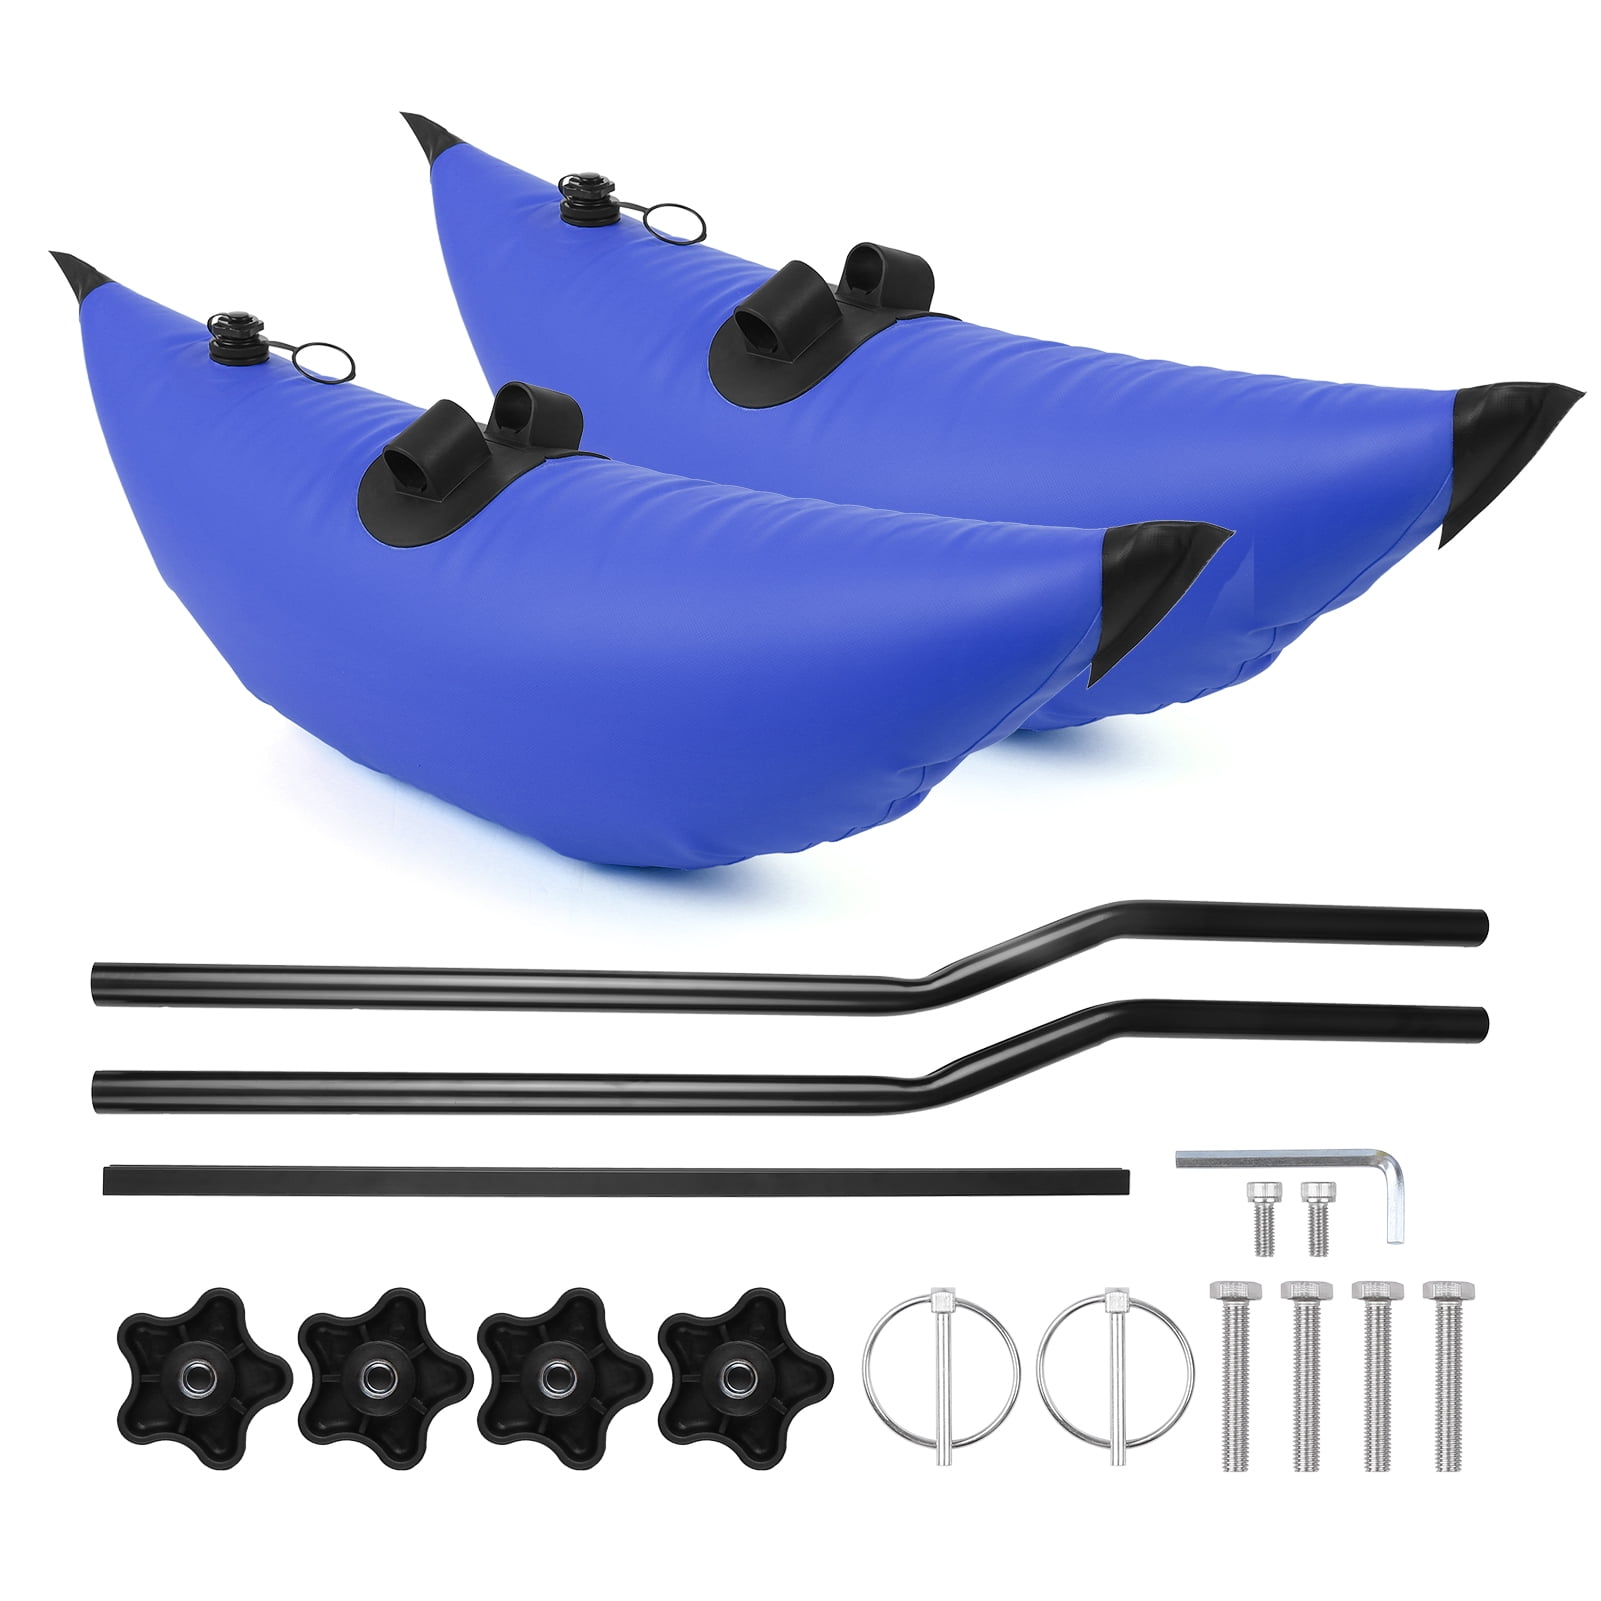 2x PVC Inflatable Outrigger Kayak Canoe Fishing Boat Lightweight Blue Stabilizer 